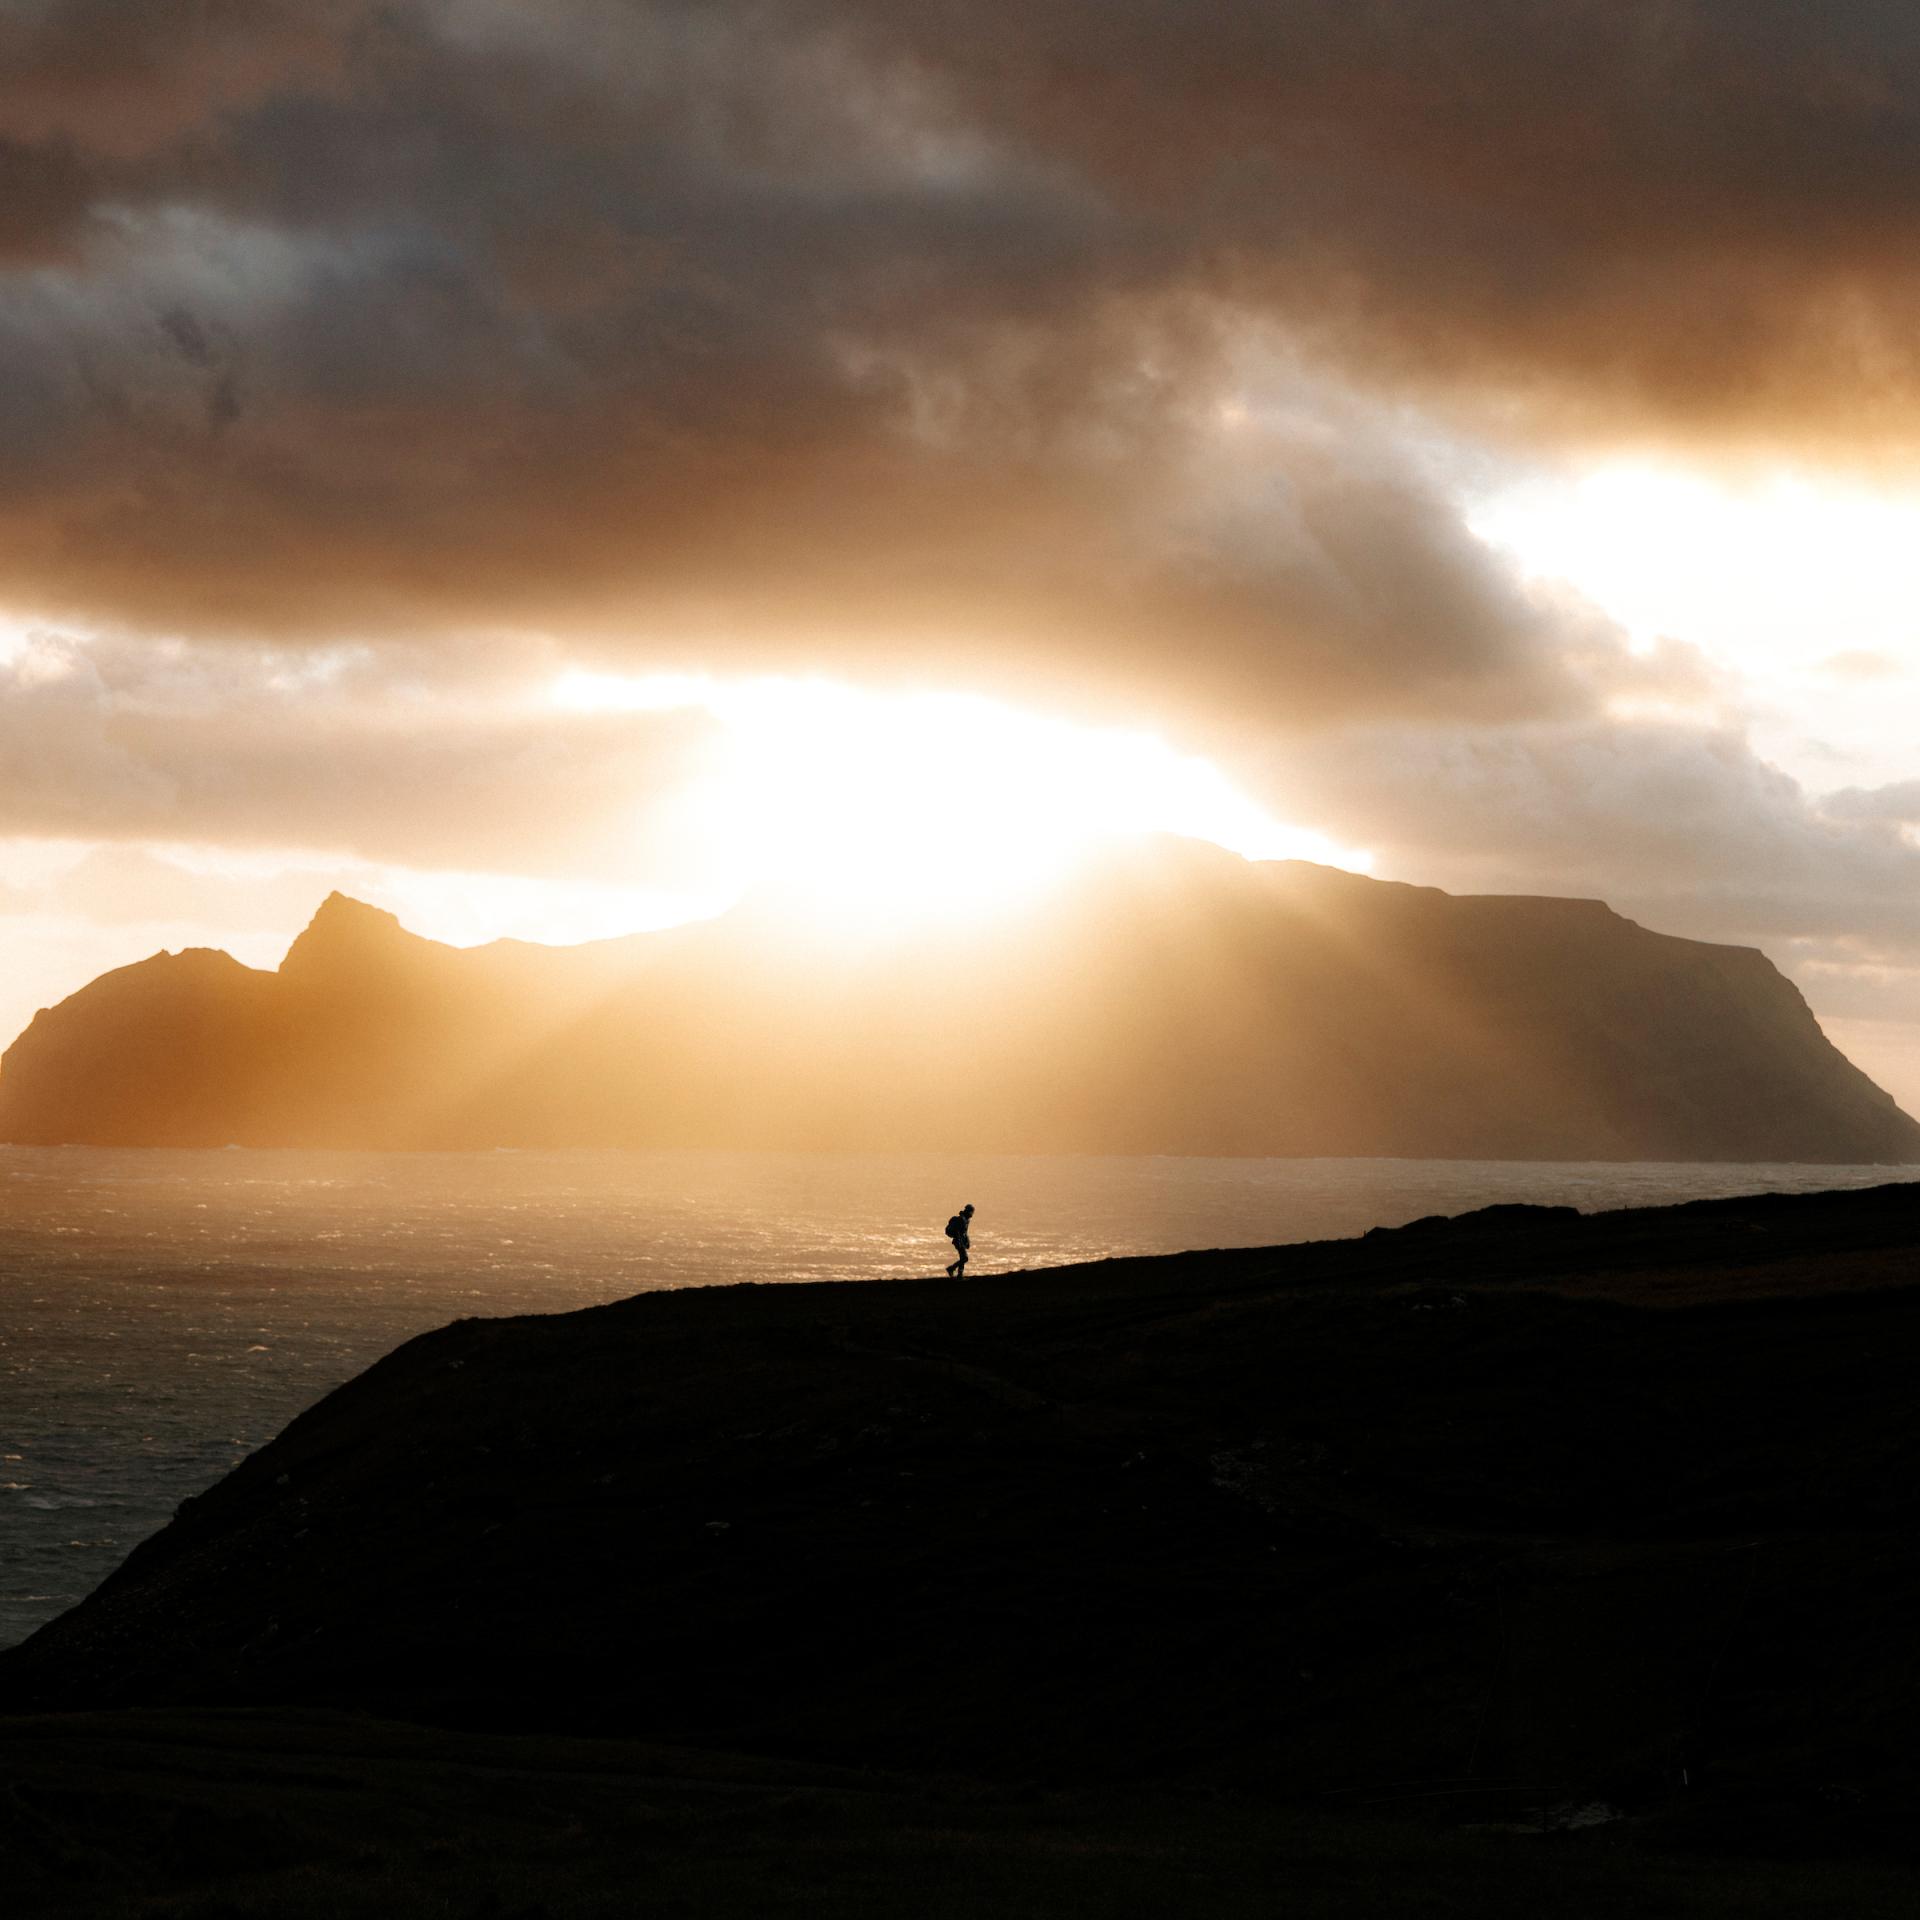 Thumbnail of - Hiking in the Faroe islands, sun and mountains. By Derek Malou